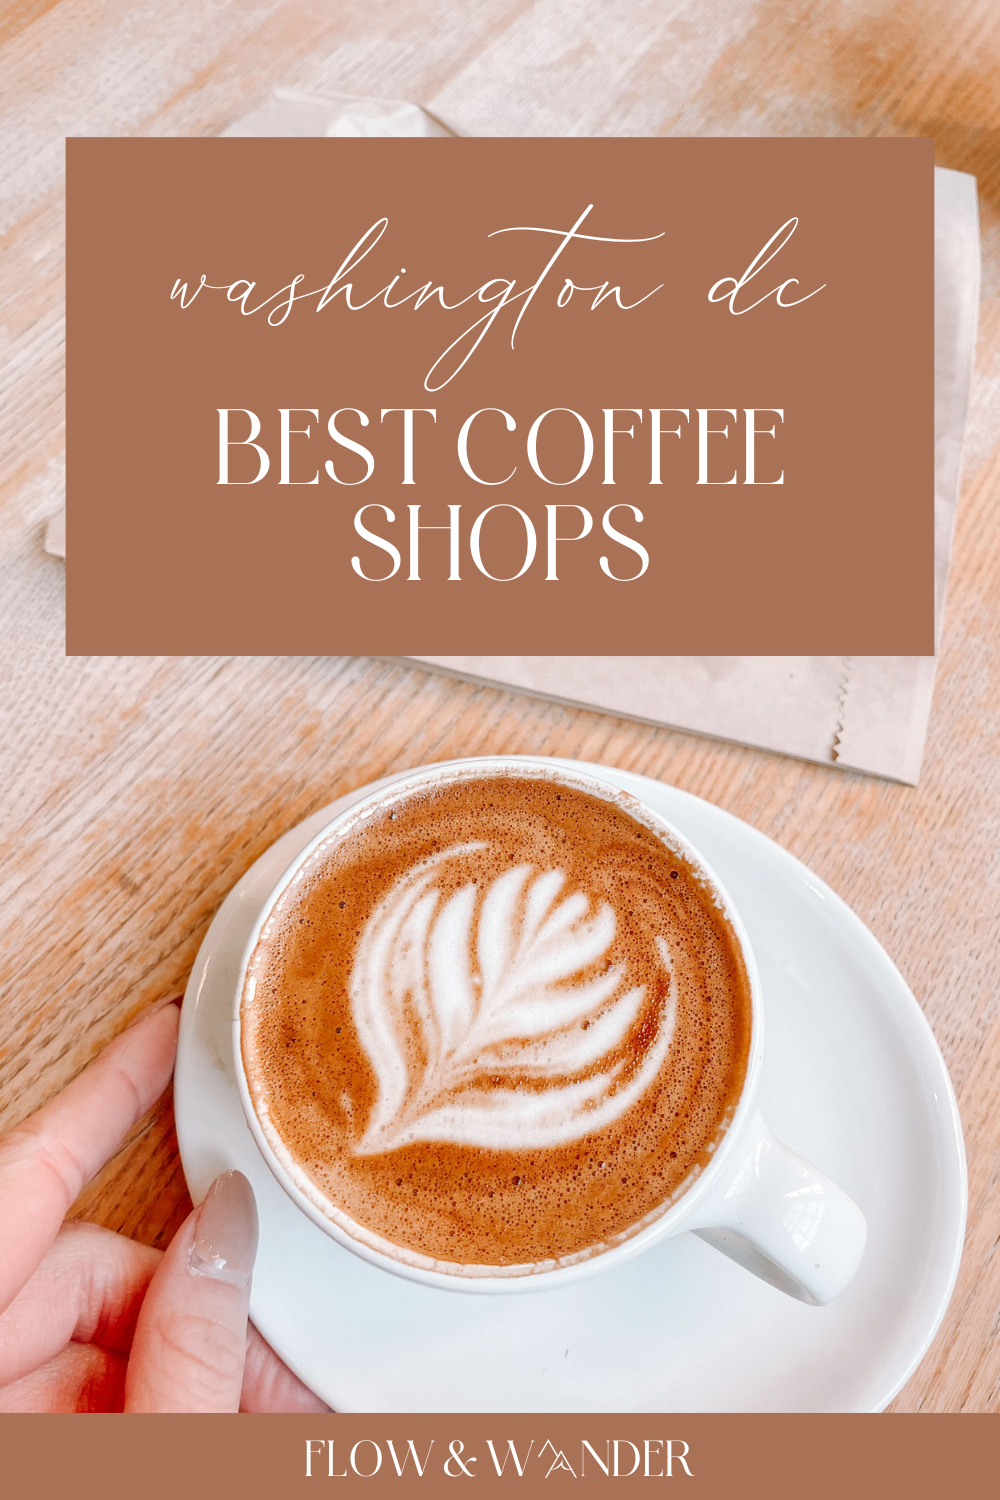 best coffee shops washington dc graphic2.png